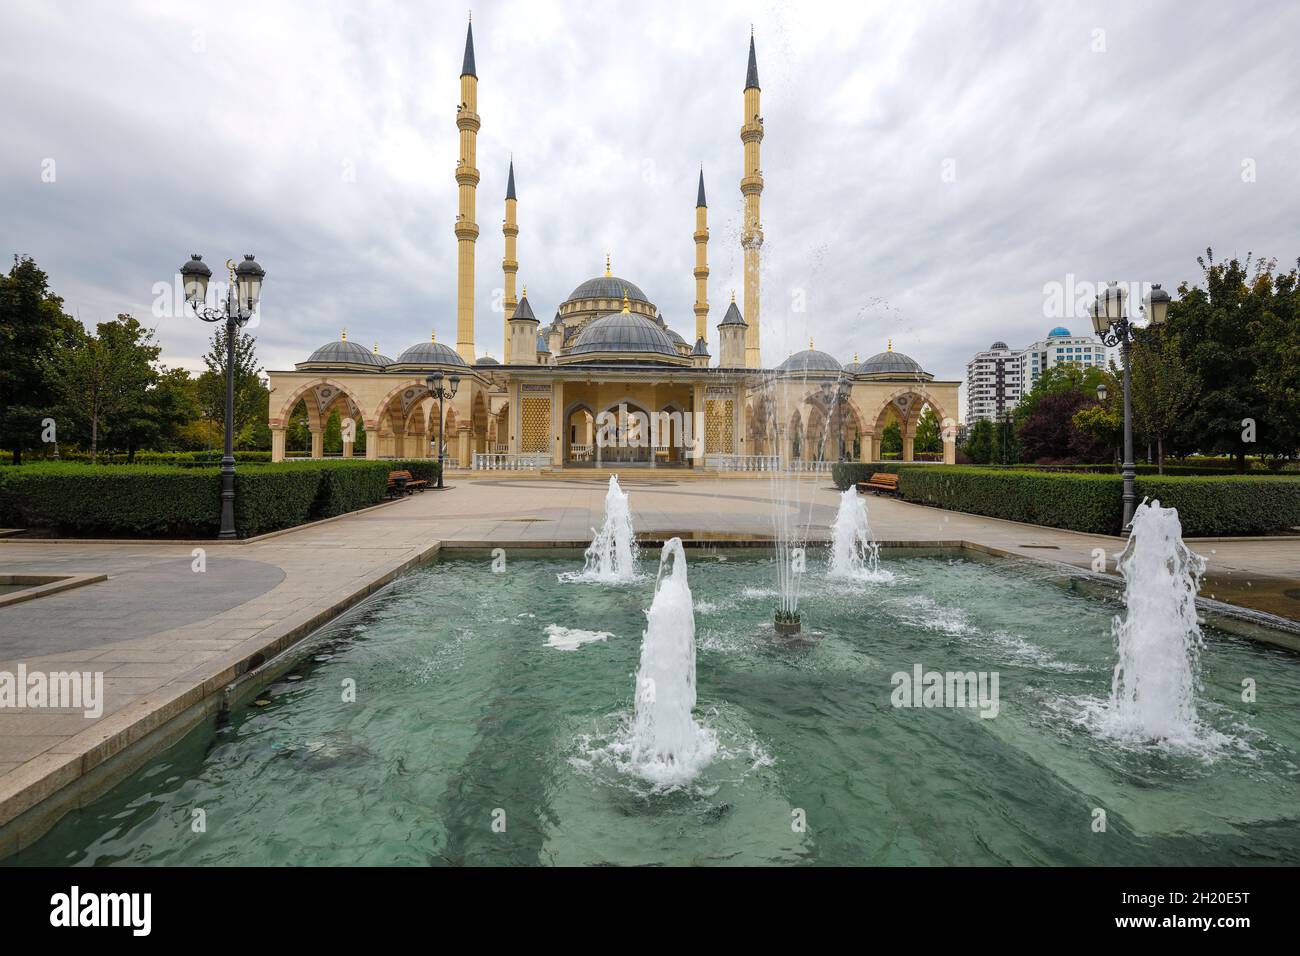 GROZNY, RUSSIA - SEPTEMBER 29, 2021: View of the Heart of Chechnya Mosque on a cloudy September day Stock Photo